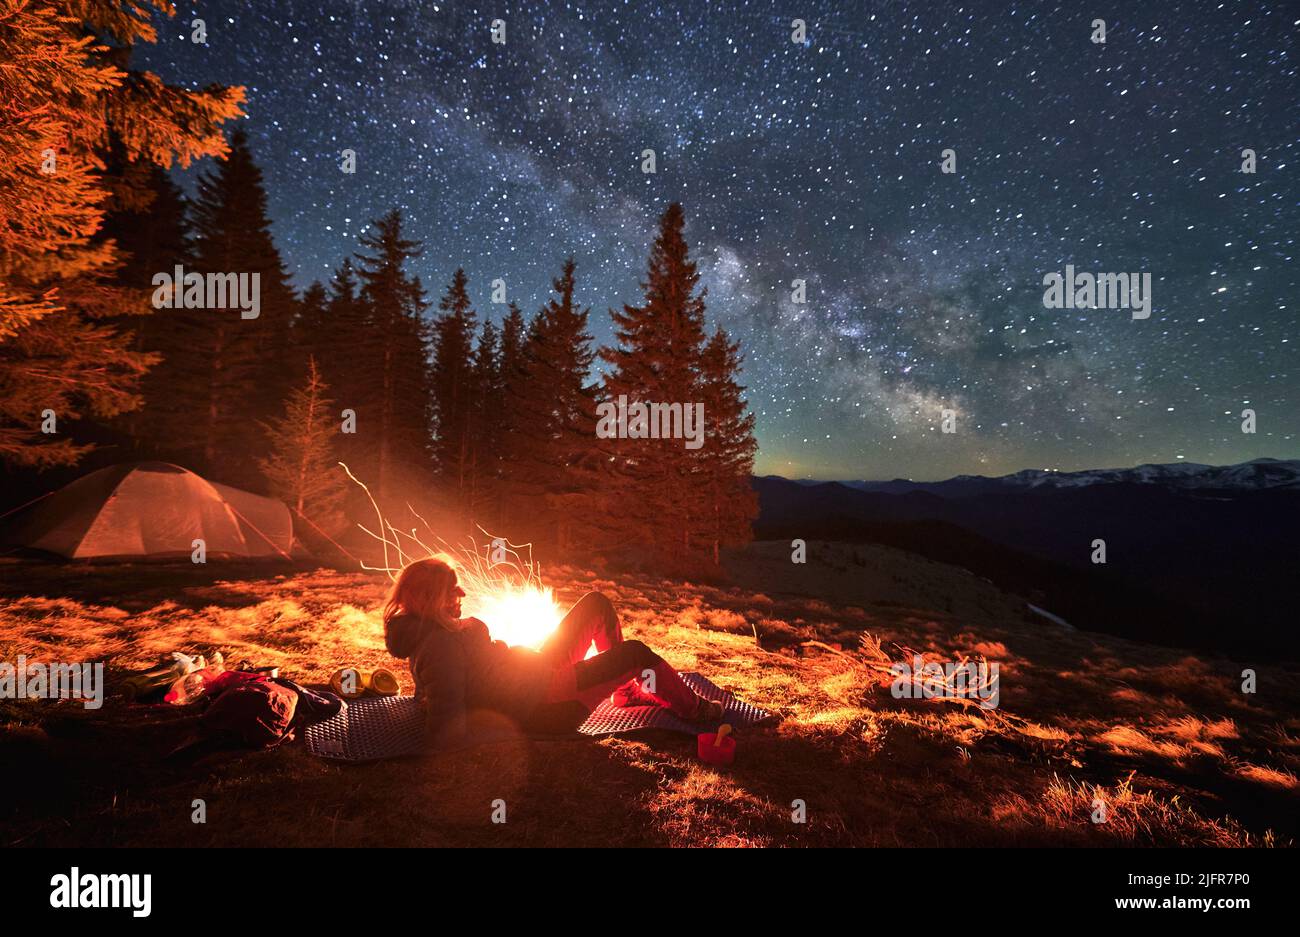 Female hiker lying at karemat near bonfire admire beauty of stunning starry sky during night in campsite, backpacker visiting mountains with tent near spruce forest in National Park Stock Photo